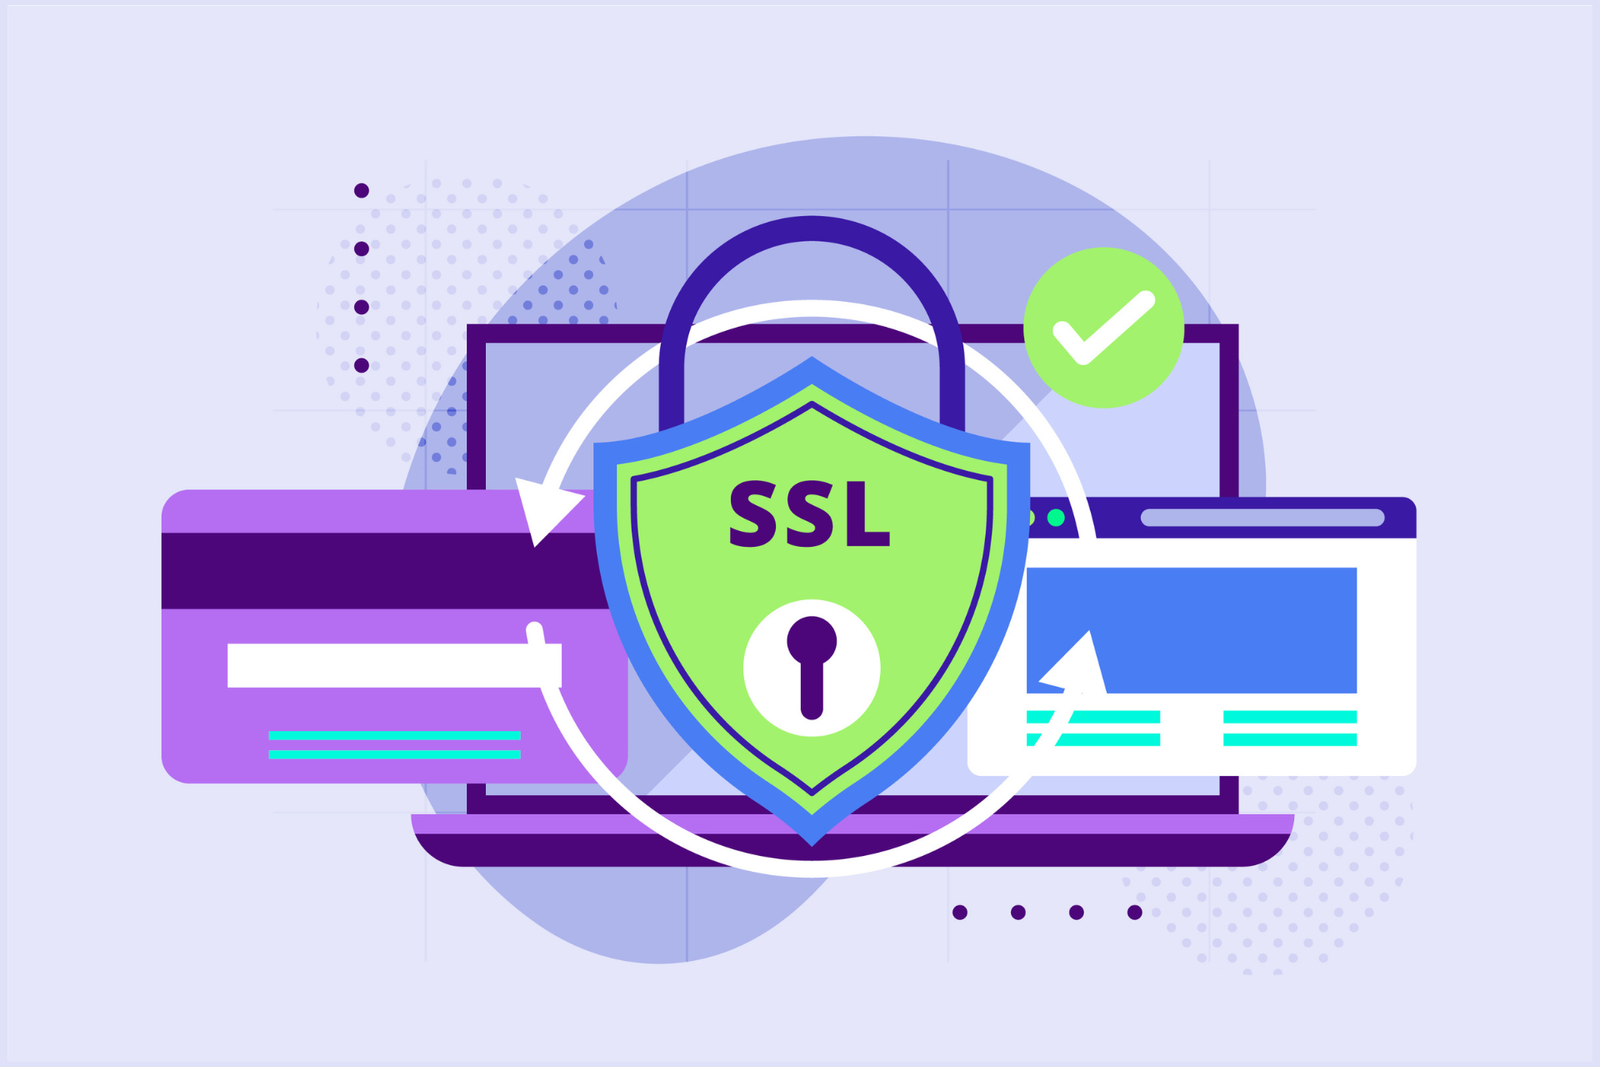 What Technical SEO Issue Can You Solve With an SSL Certificate?